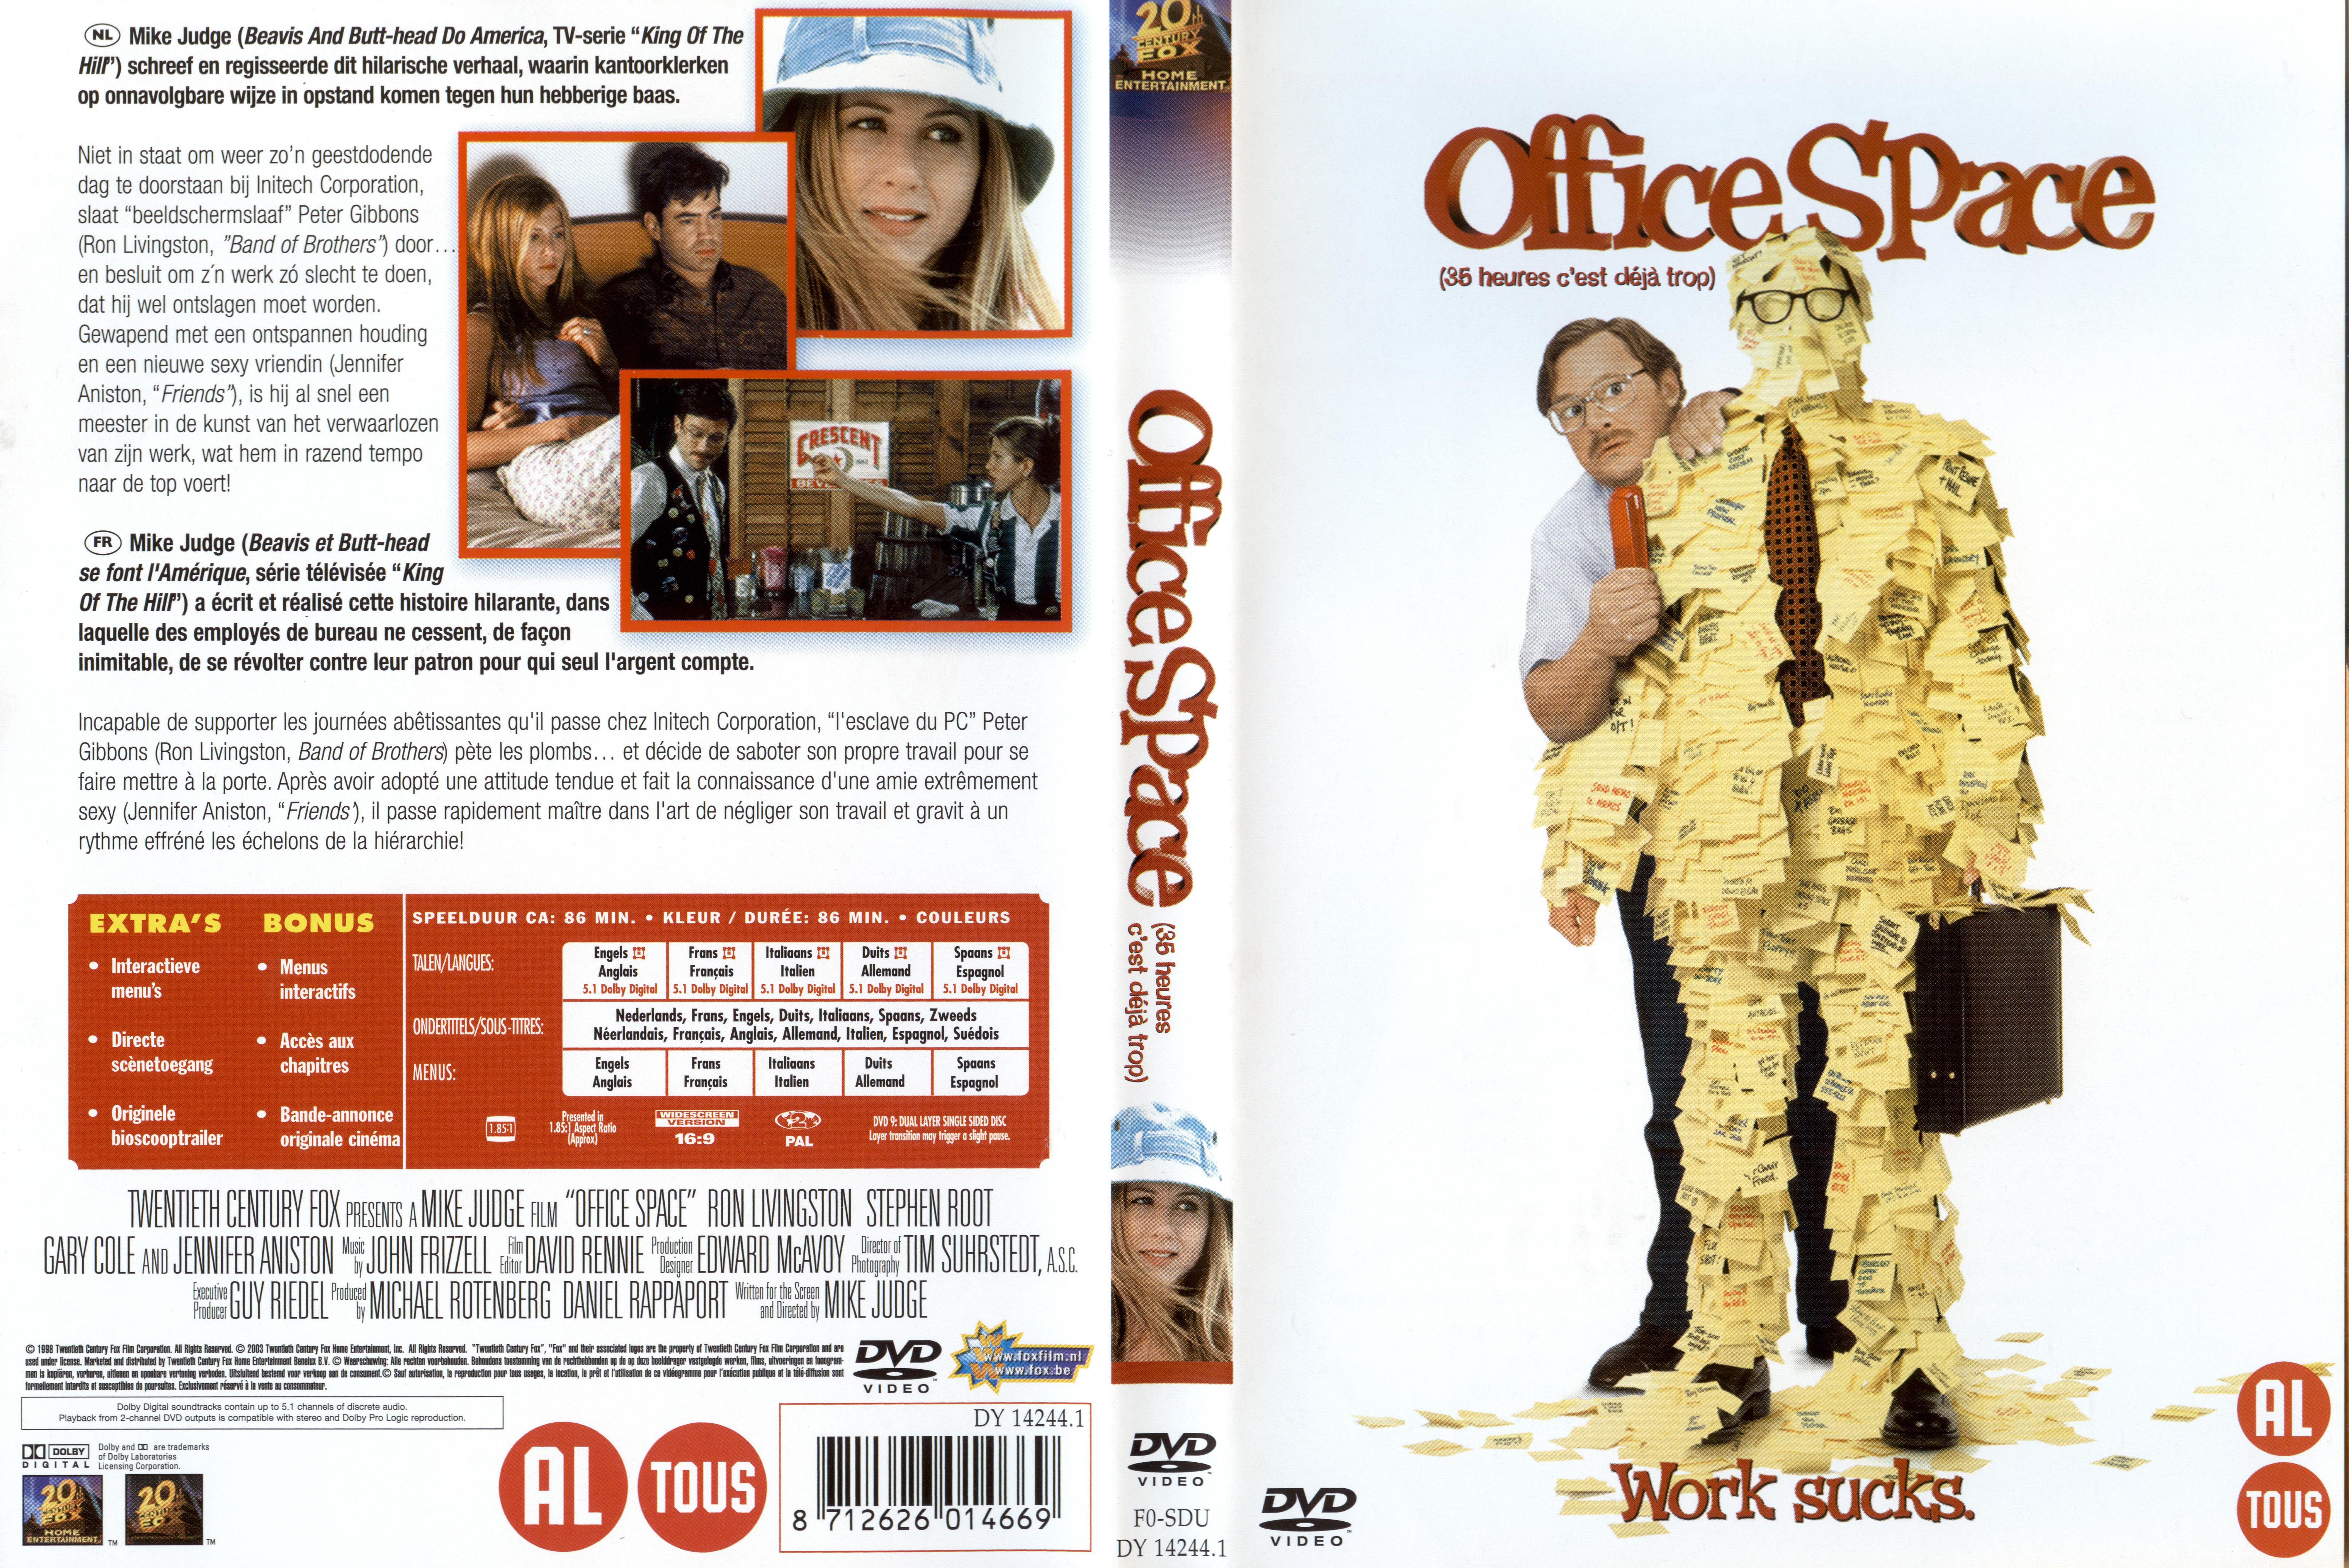 Jaquette DVD Office space - 35 heures c